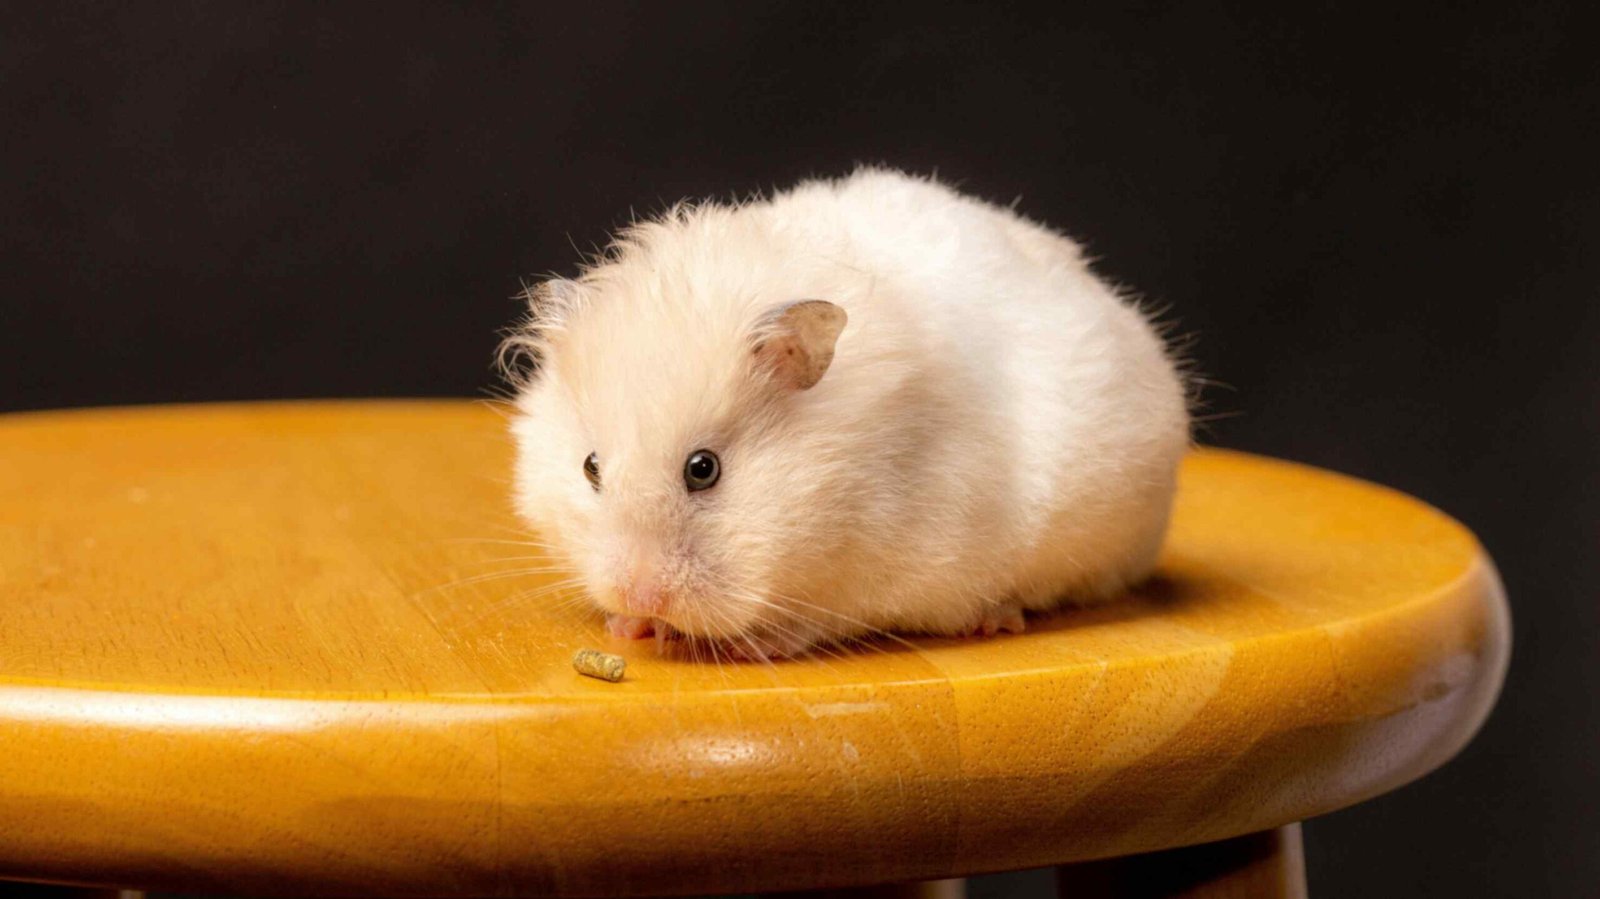 A white gerbil is sitting on a stool, eating food.